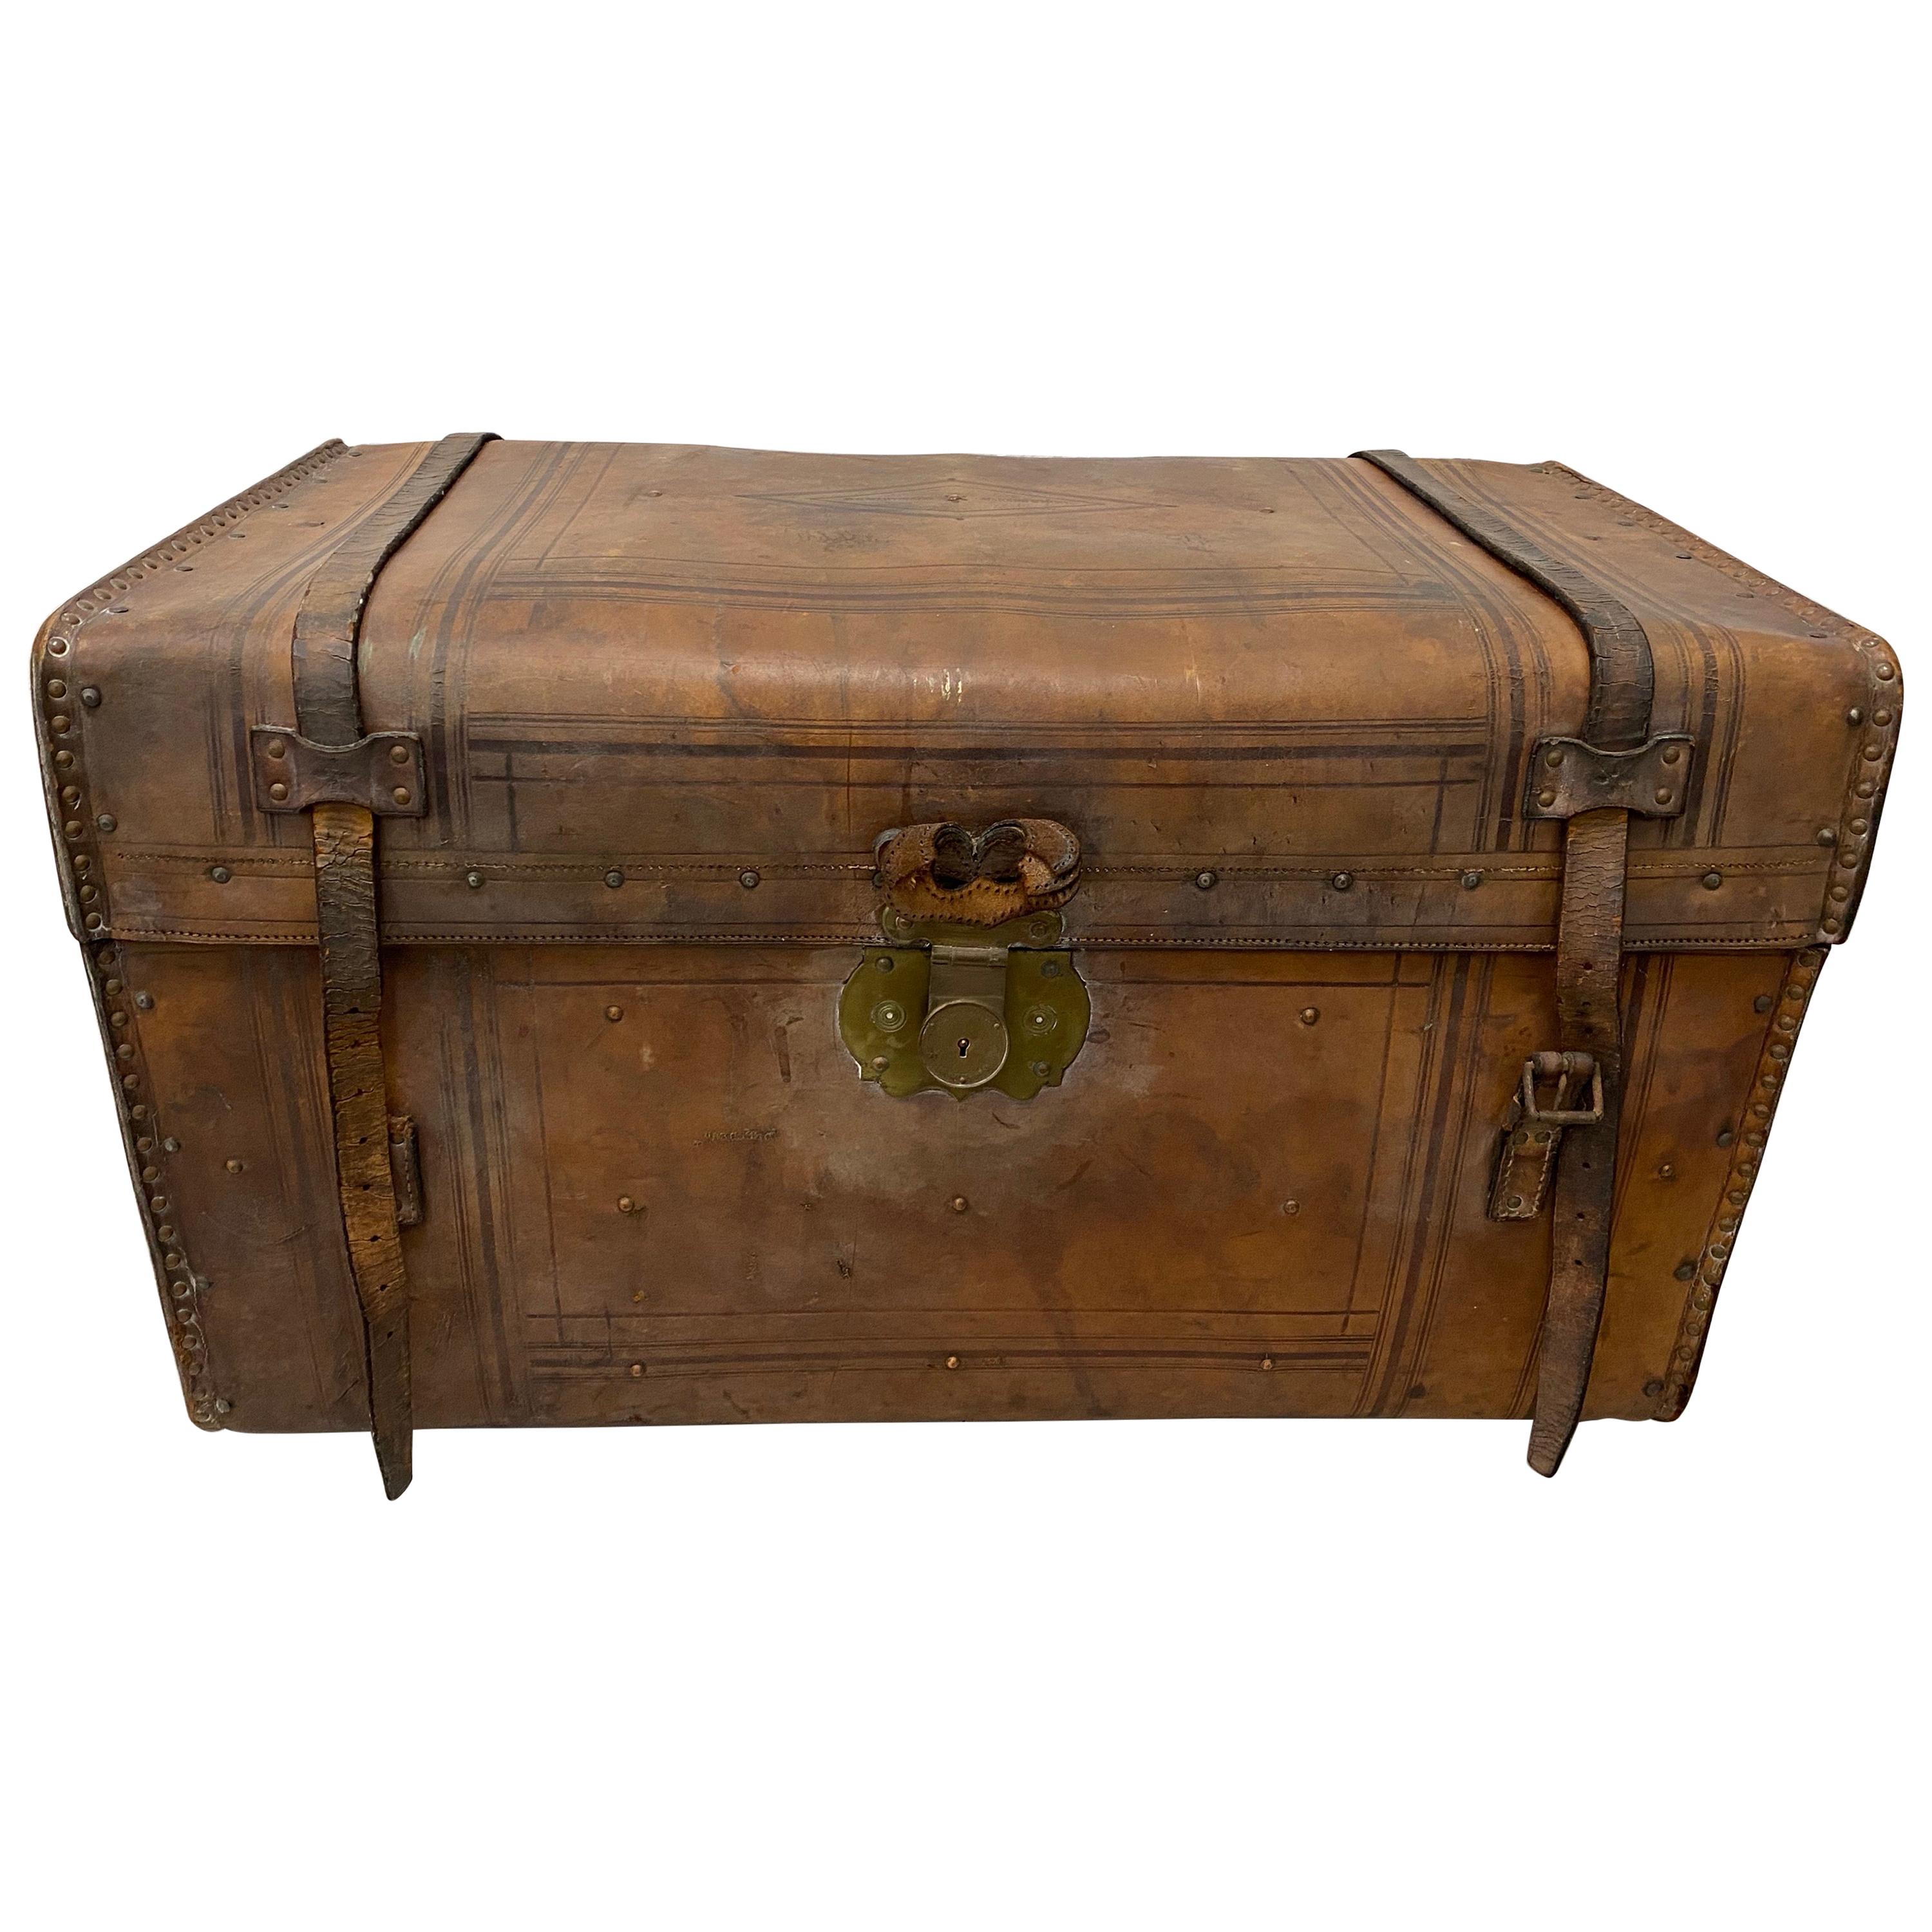 Details about   19th Century Dome Top Leather and Wood Trunk Brass Studs 